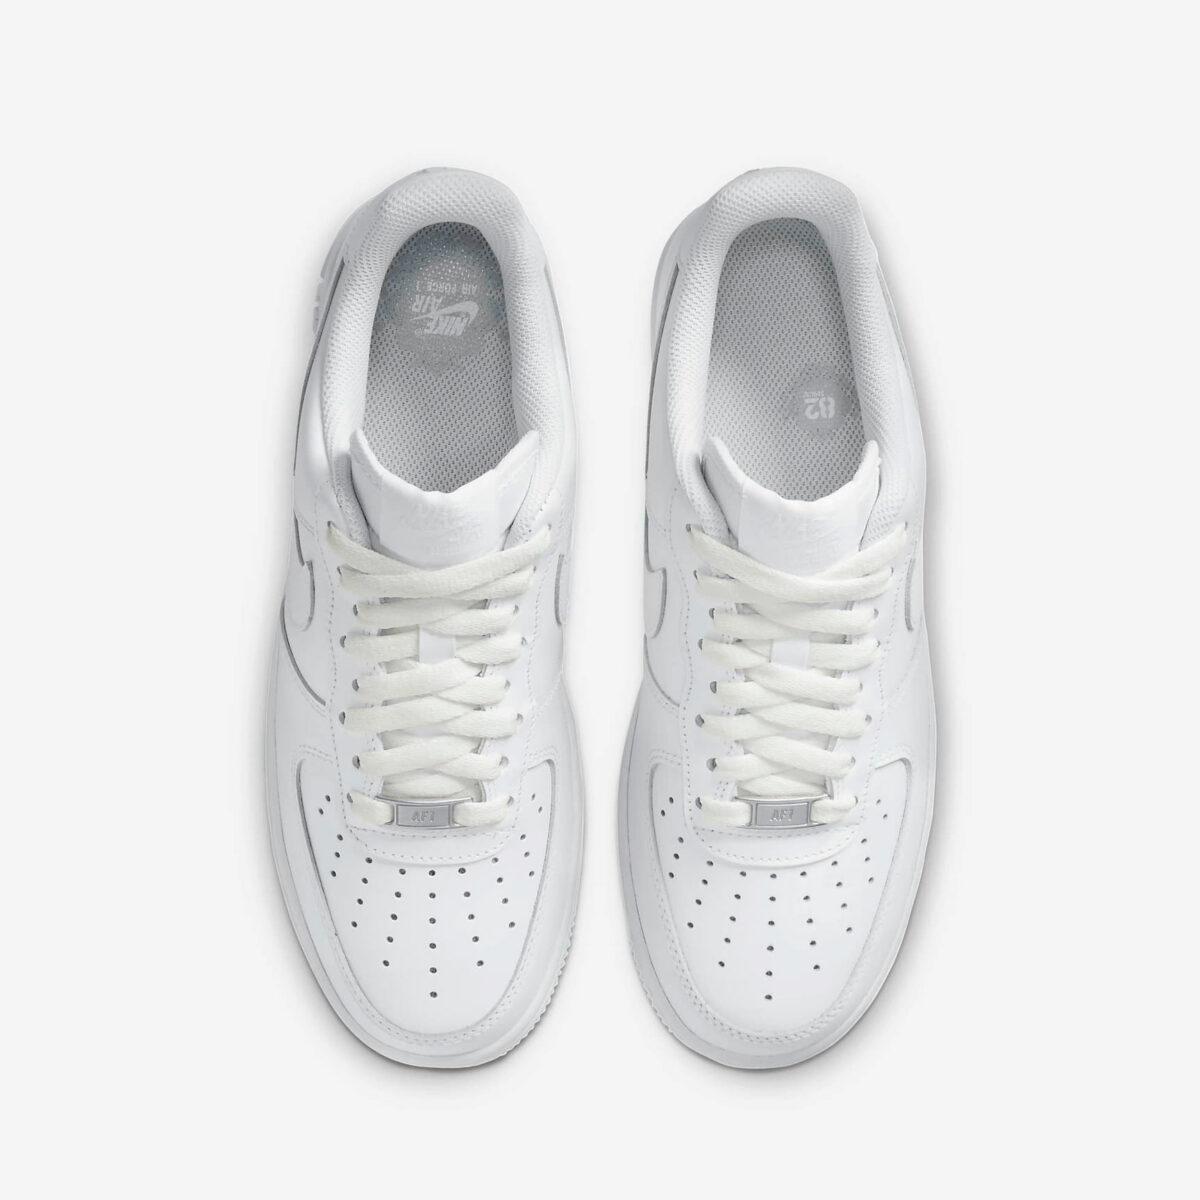 Nike Air Force 1 '07 Damenschuh Weiss In Stock